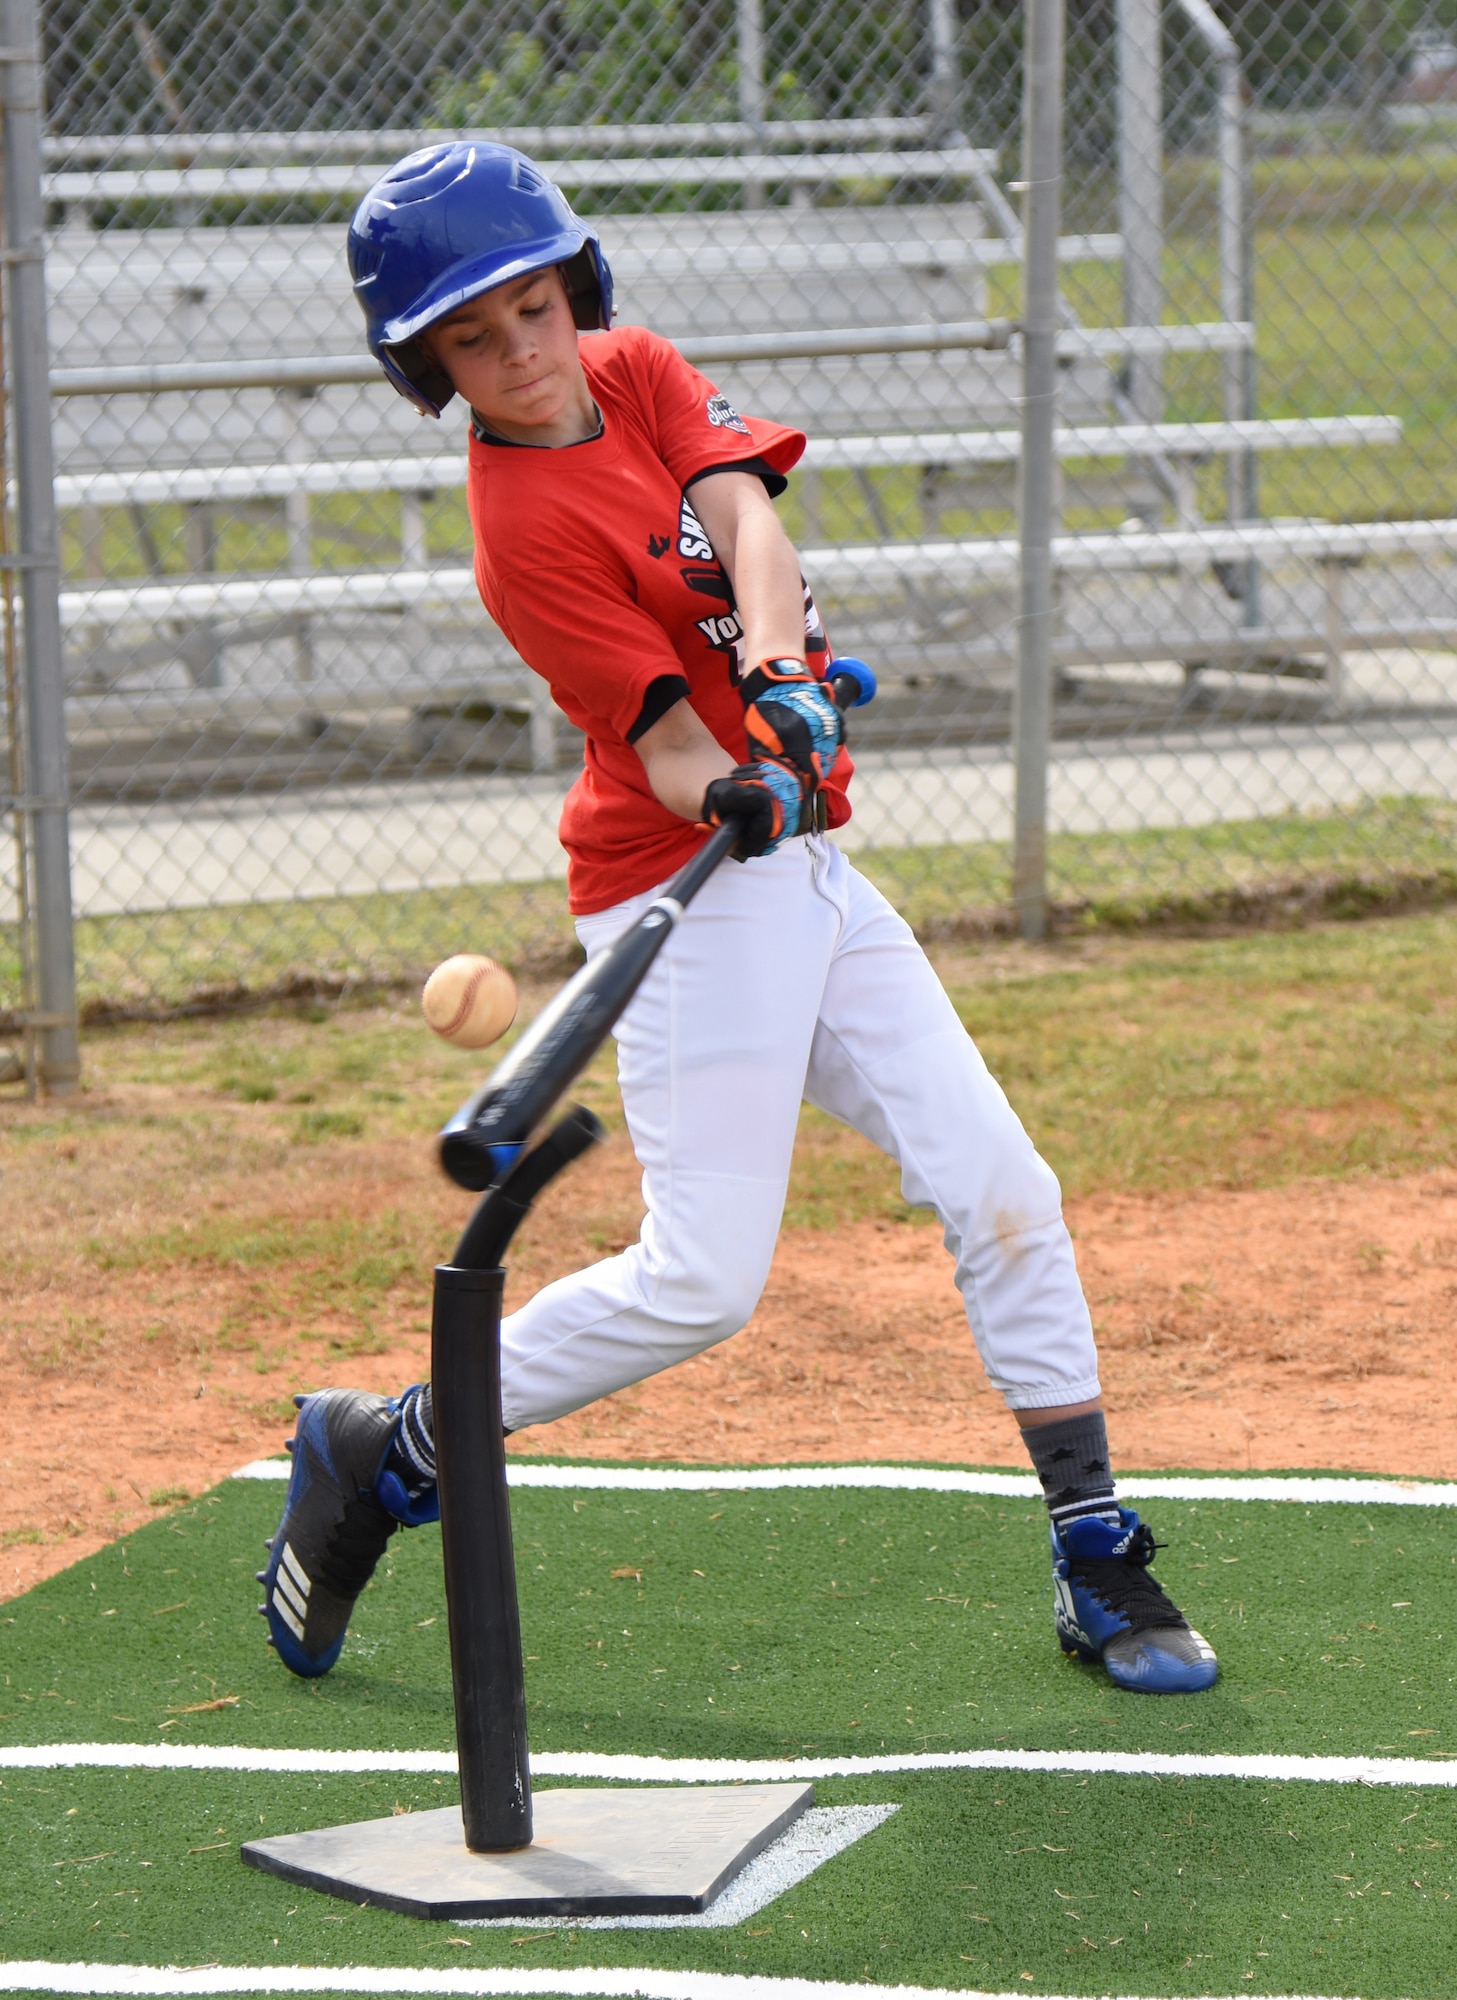 Maddox Cloutier, son of U.S. Air Force Master Sgt. Brian Cloutier, 558th Flying Training Squadron remotely piloted aircraft pilot training student, Joint Base San Antonio-Randolph Air Force Base, Texas, takes a swing during the Biloxi Shuckers Youth Baseball Clinic on the youth center baseball field at Keesler Air Force Base, Mississippi, May 5, 2018. The clinic provided hitting, pitching, base running and fielding instruction from members of the Biloxi Shuckers minor league baseball team. (U.S. Air Force photo by Kemberly Groue)